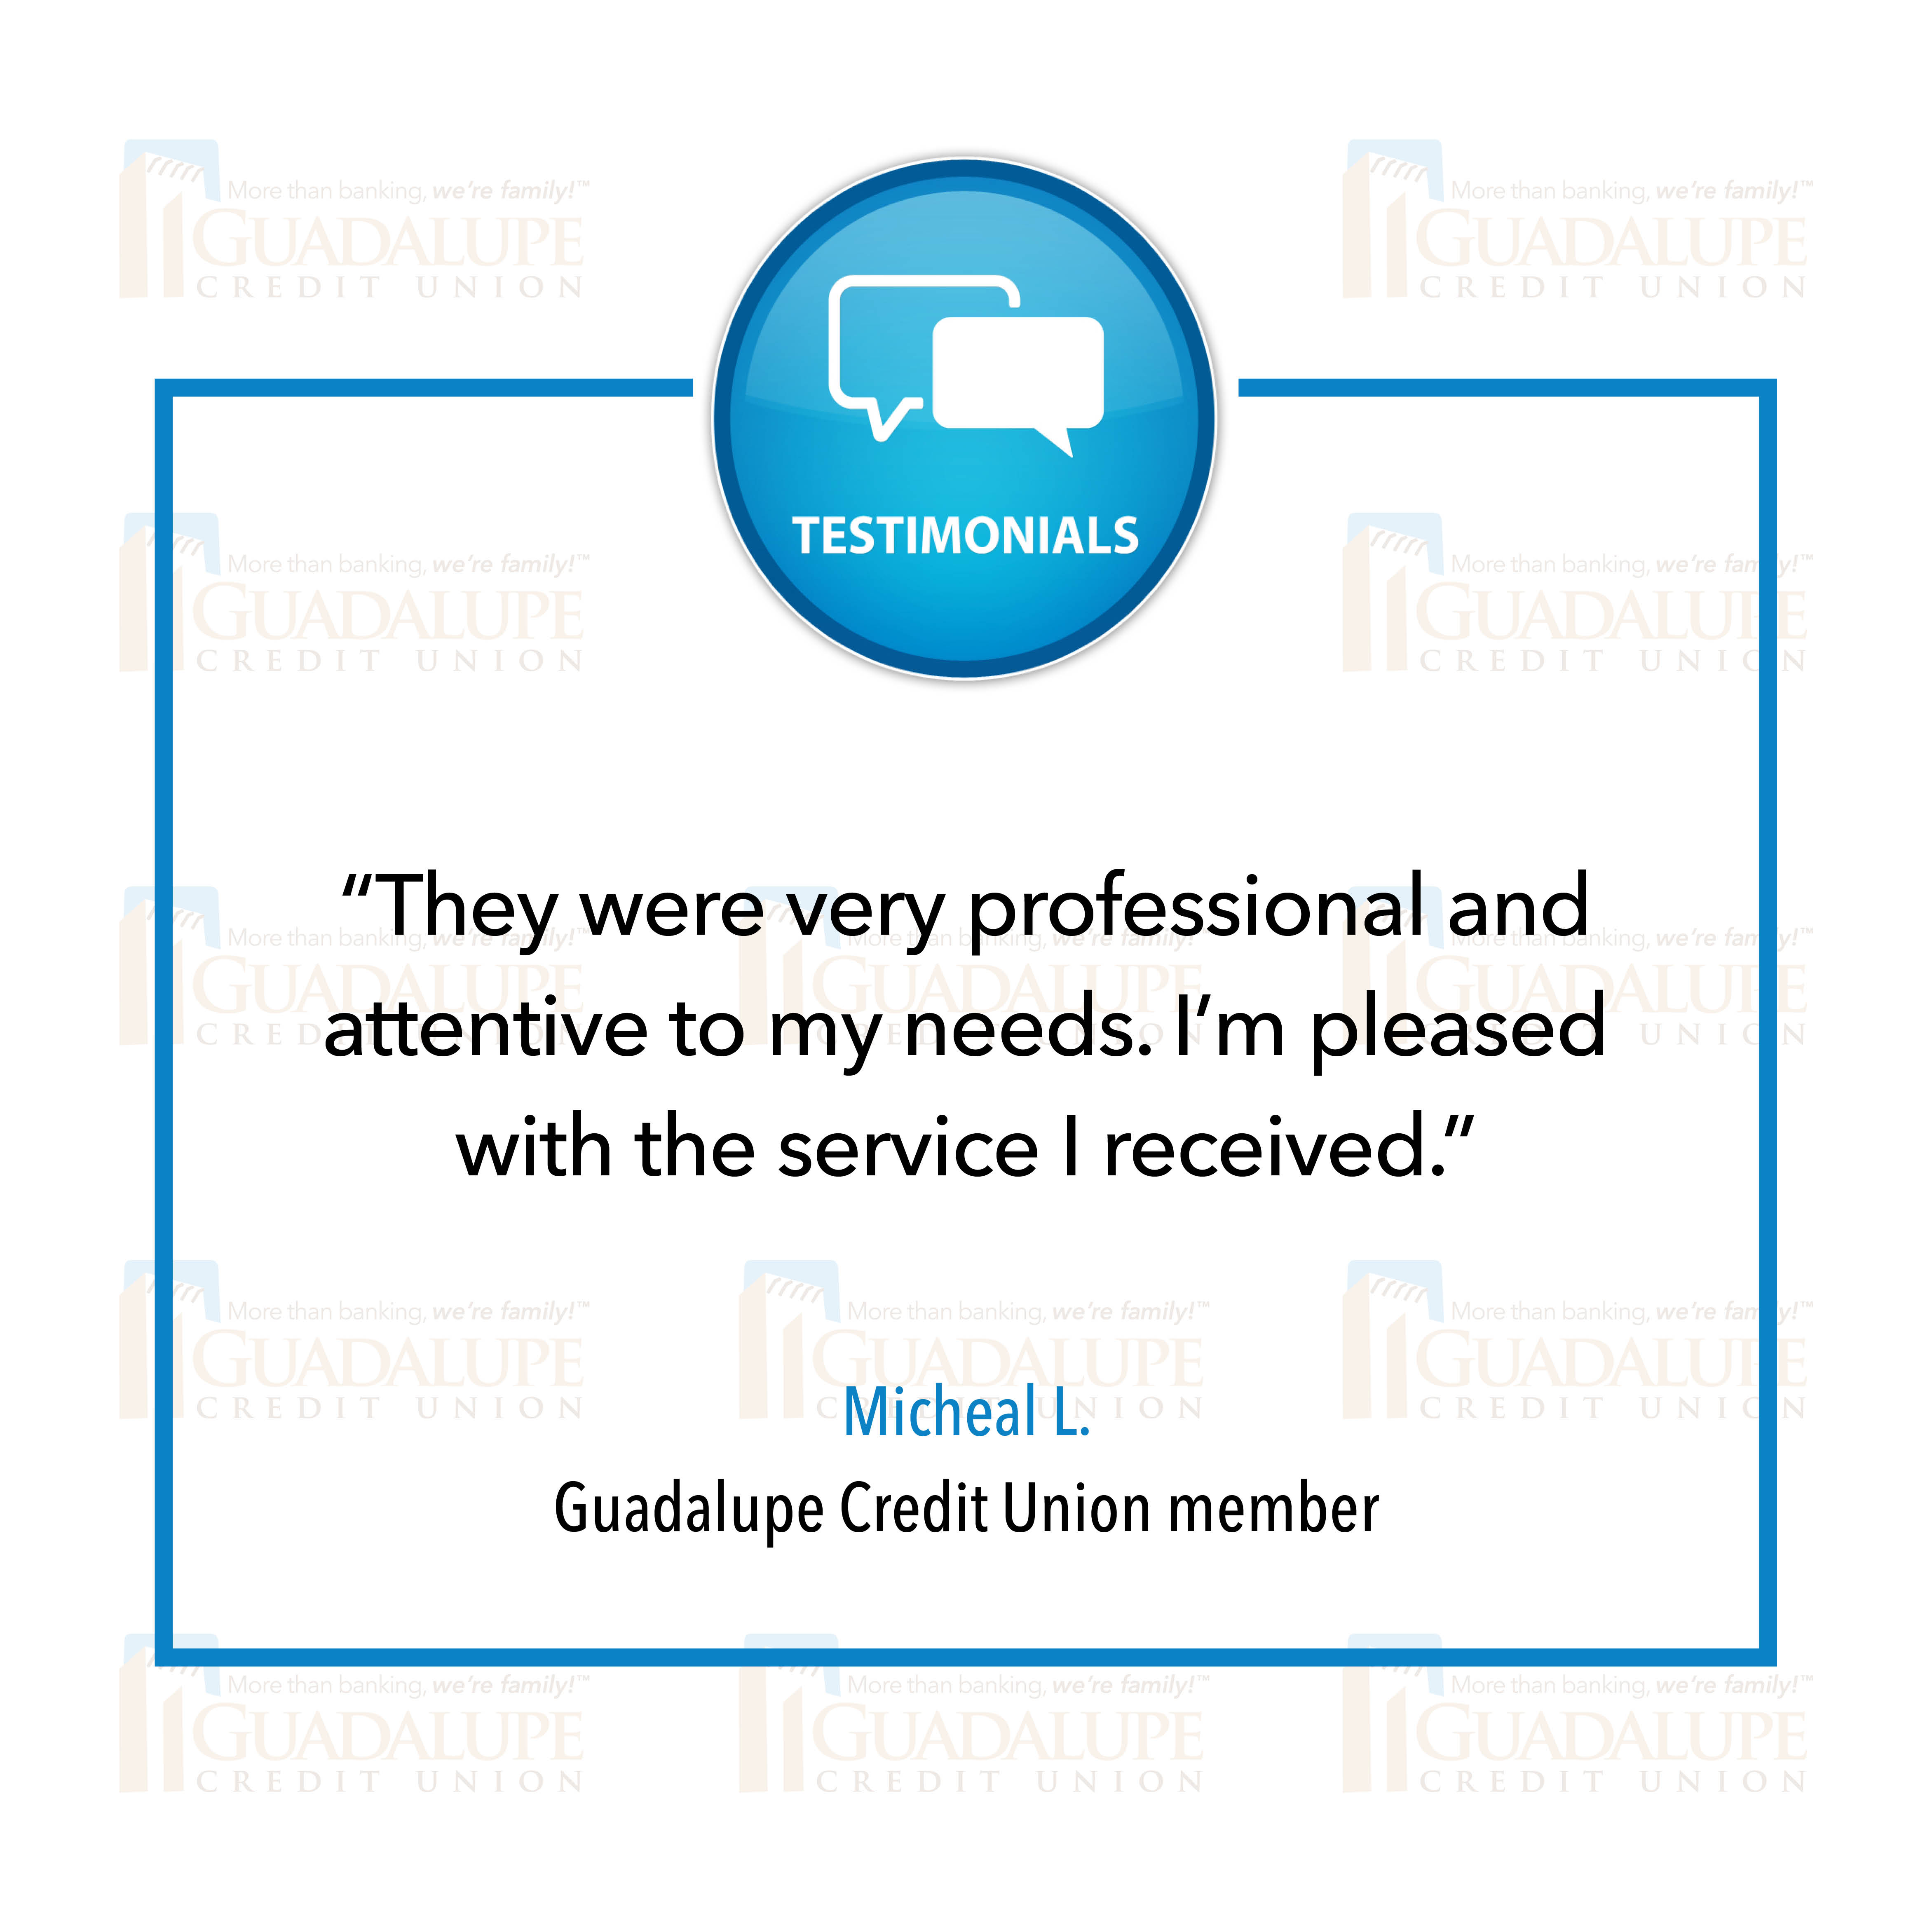 GCU Testimonial - "I will convert all my banking here. I really appreciate the locality of GCU. Thanks for everything!"